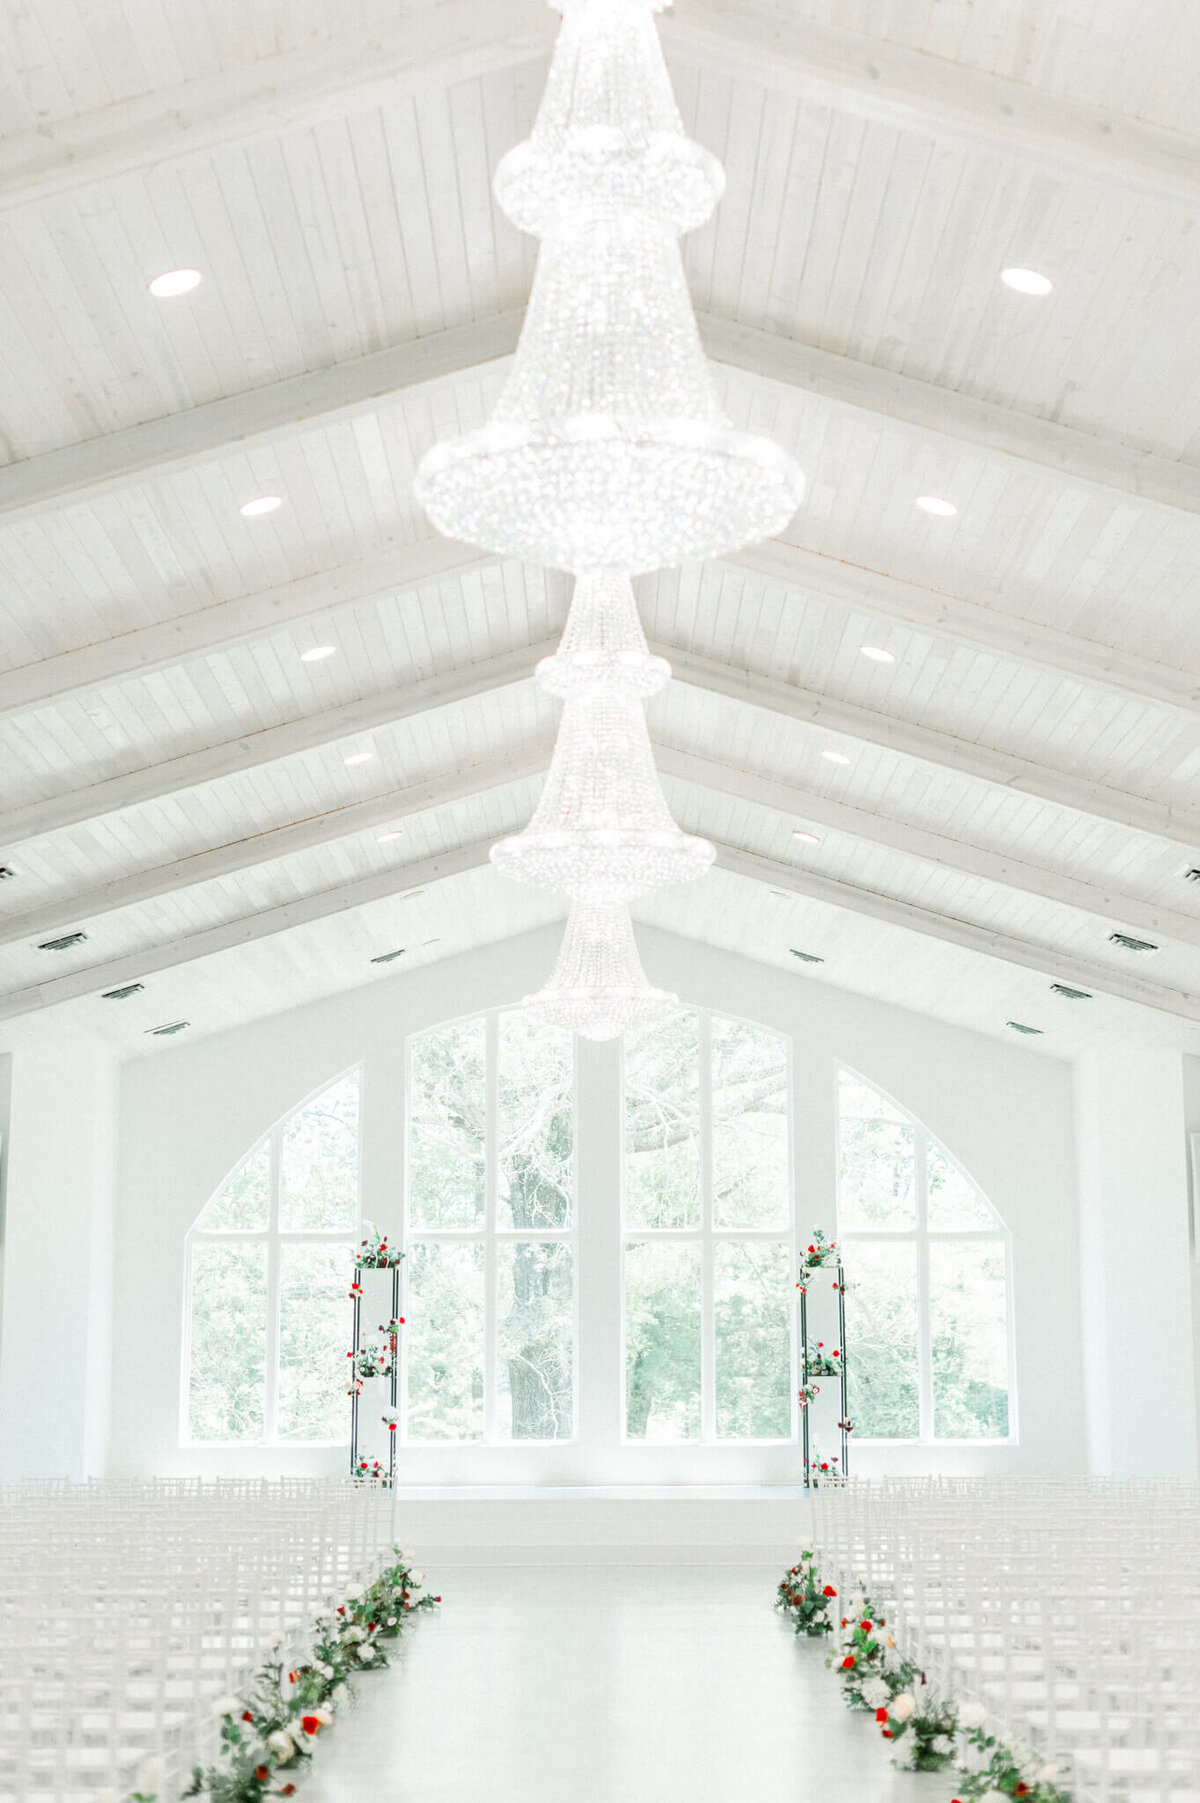 interior photo of all-white wedding venue with large windows and glass chandeliers